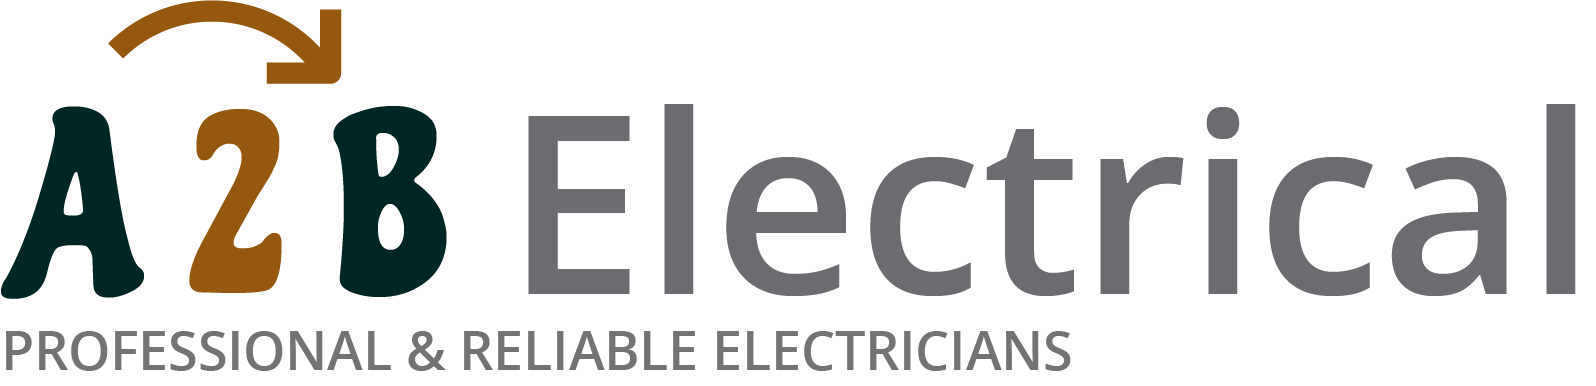 If you have electrical wiring problems in Watford, we can provide an electrician to have a look for you. 